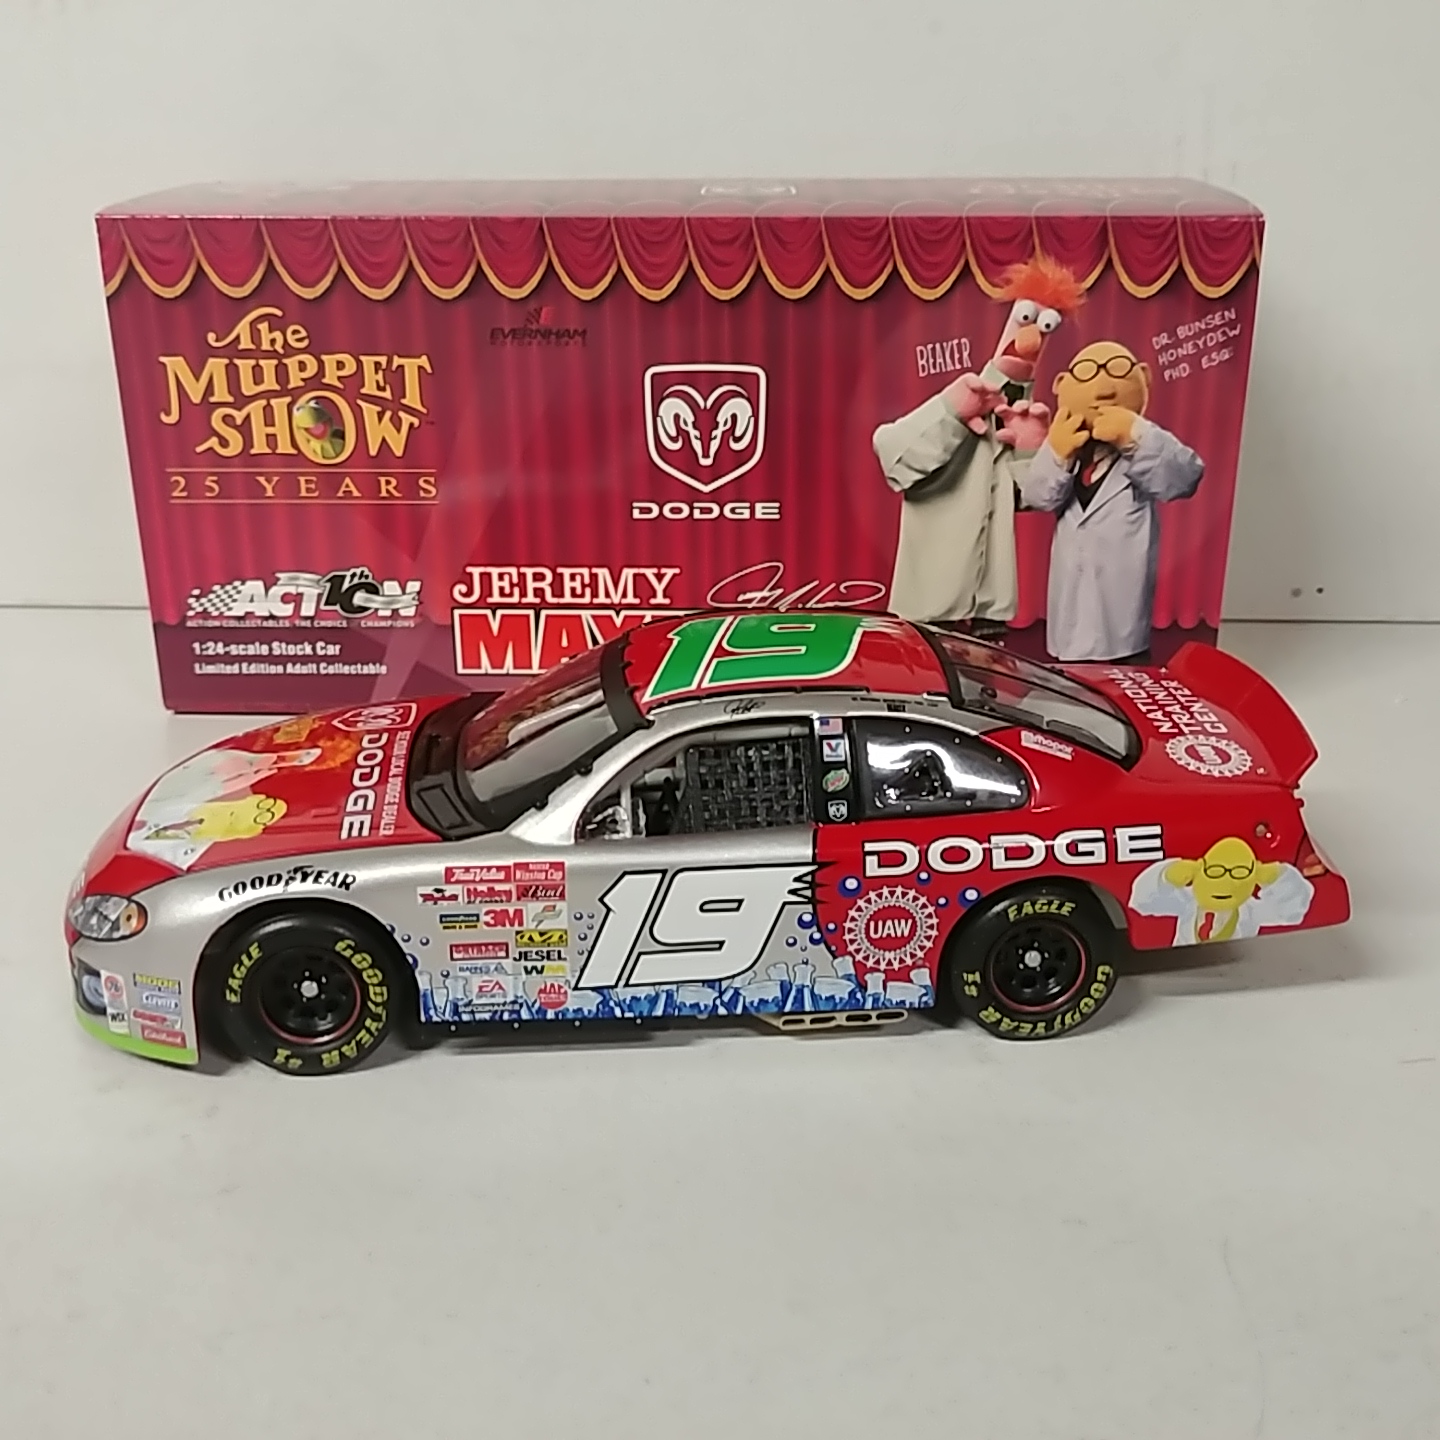 2002 Jeremy Mayfield 1/24th Dodge Dealers "Muppets" Intrepid R/T